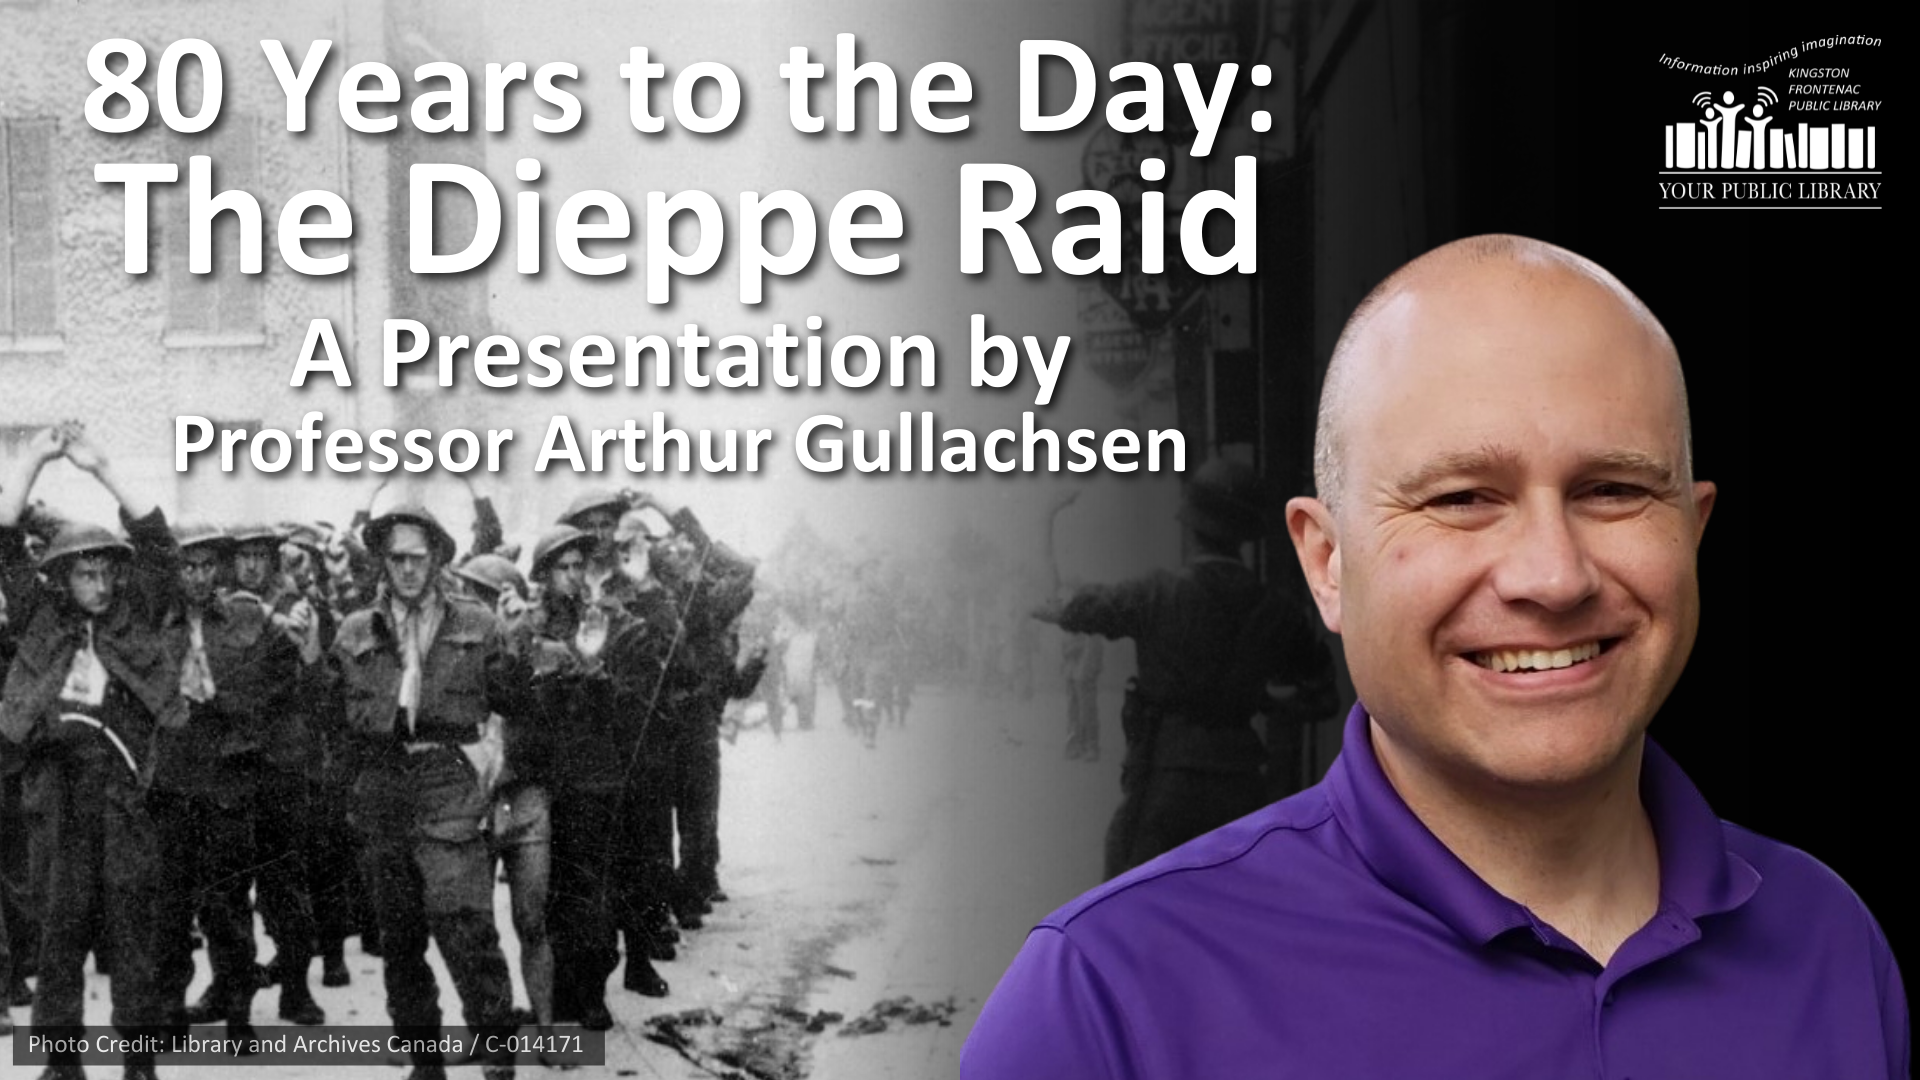 A white man in a purple golf shirt against a black and white image of personnel captured after the Dieppe Raid. Text reads 80 Years to the Day: The Dieppe Raid A Presentation by Professor Arthur Gullachsen.